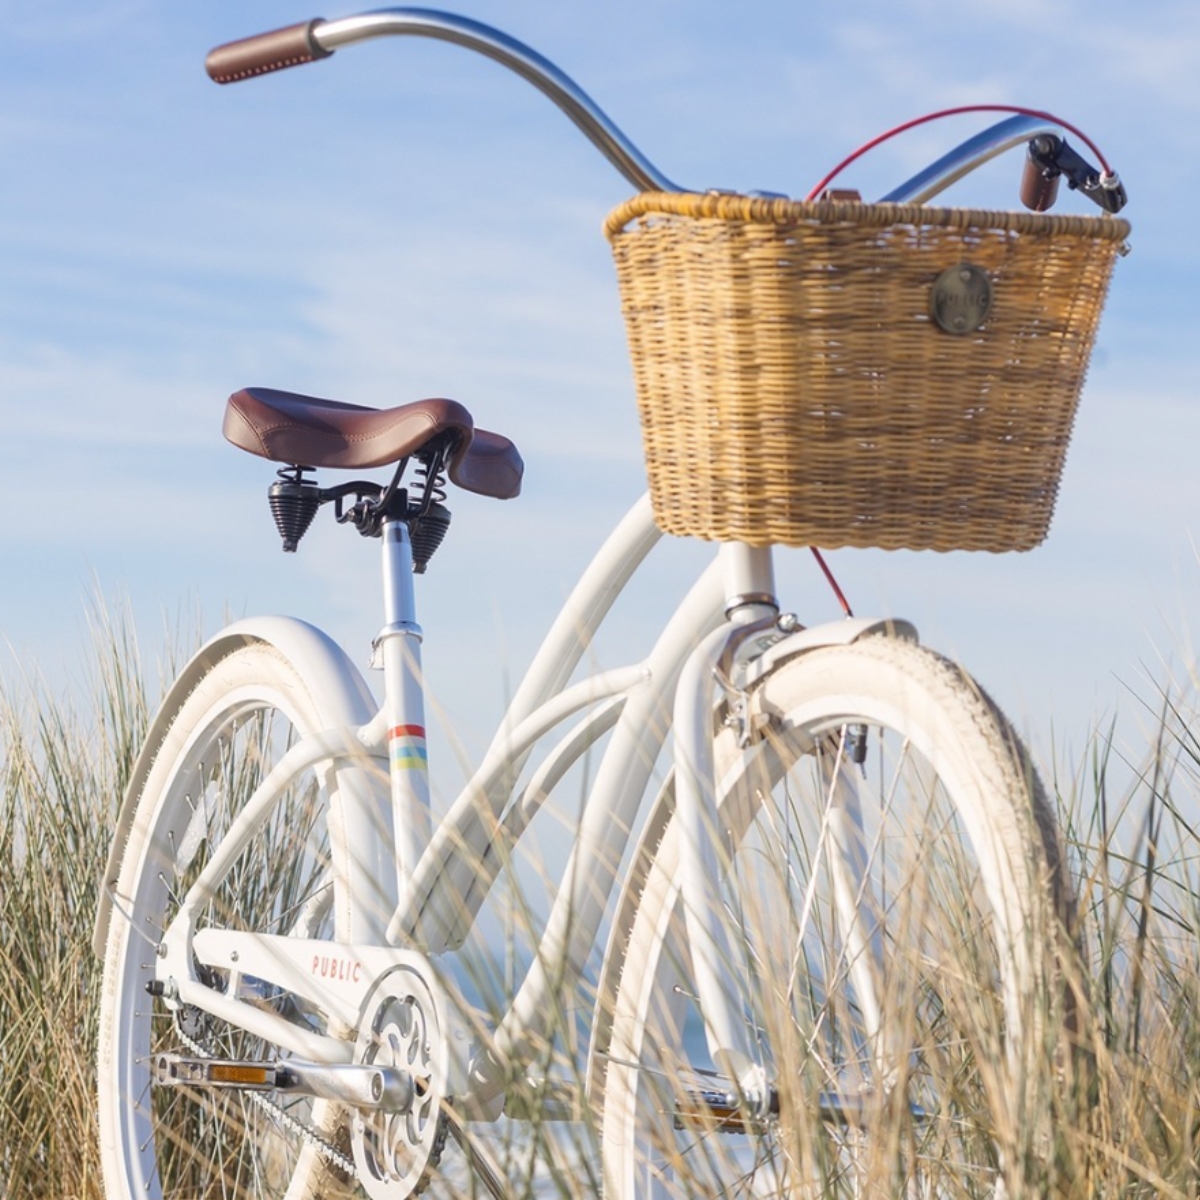 White bicycle with a wicker PUBLIC Bikes bike basket attached